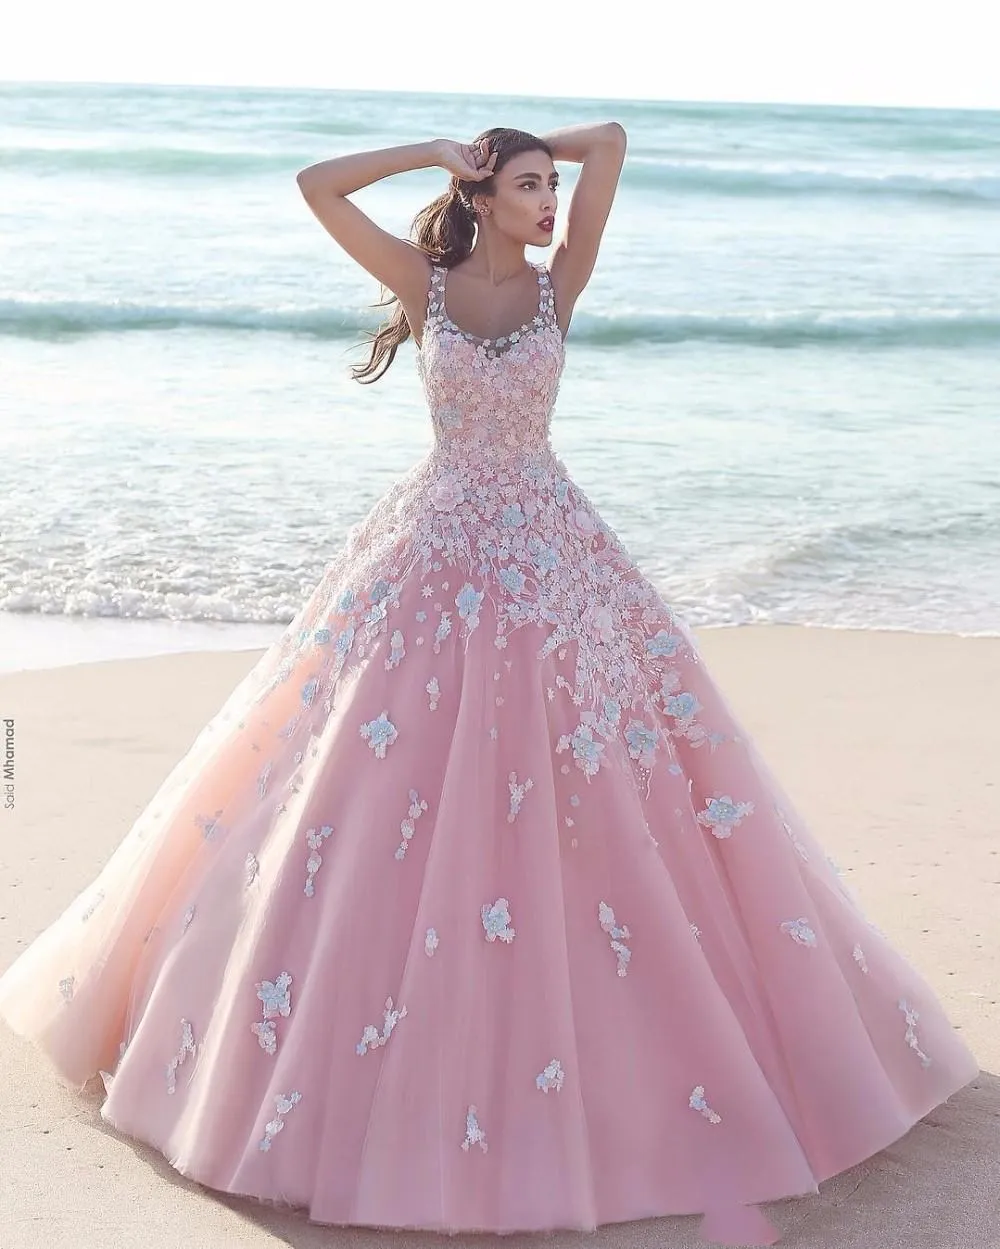 Principessa Floral Floral Pink Ball Gown Quinceanera Abiti Applique Tulle Scoop Sticking Senza Maniche Corpetto Lungo Prom Dresses Formal Party